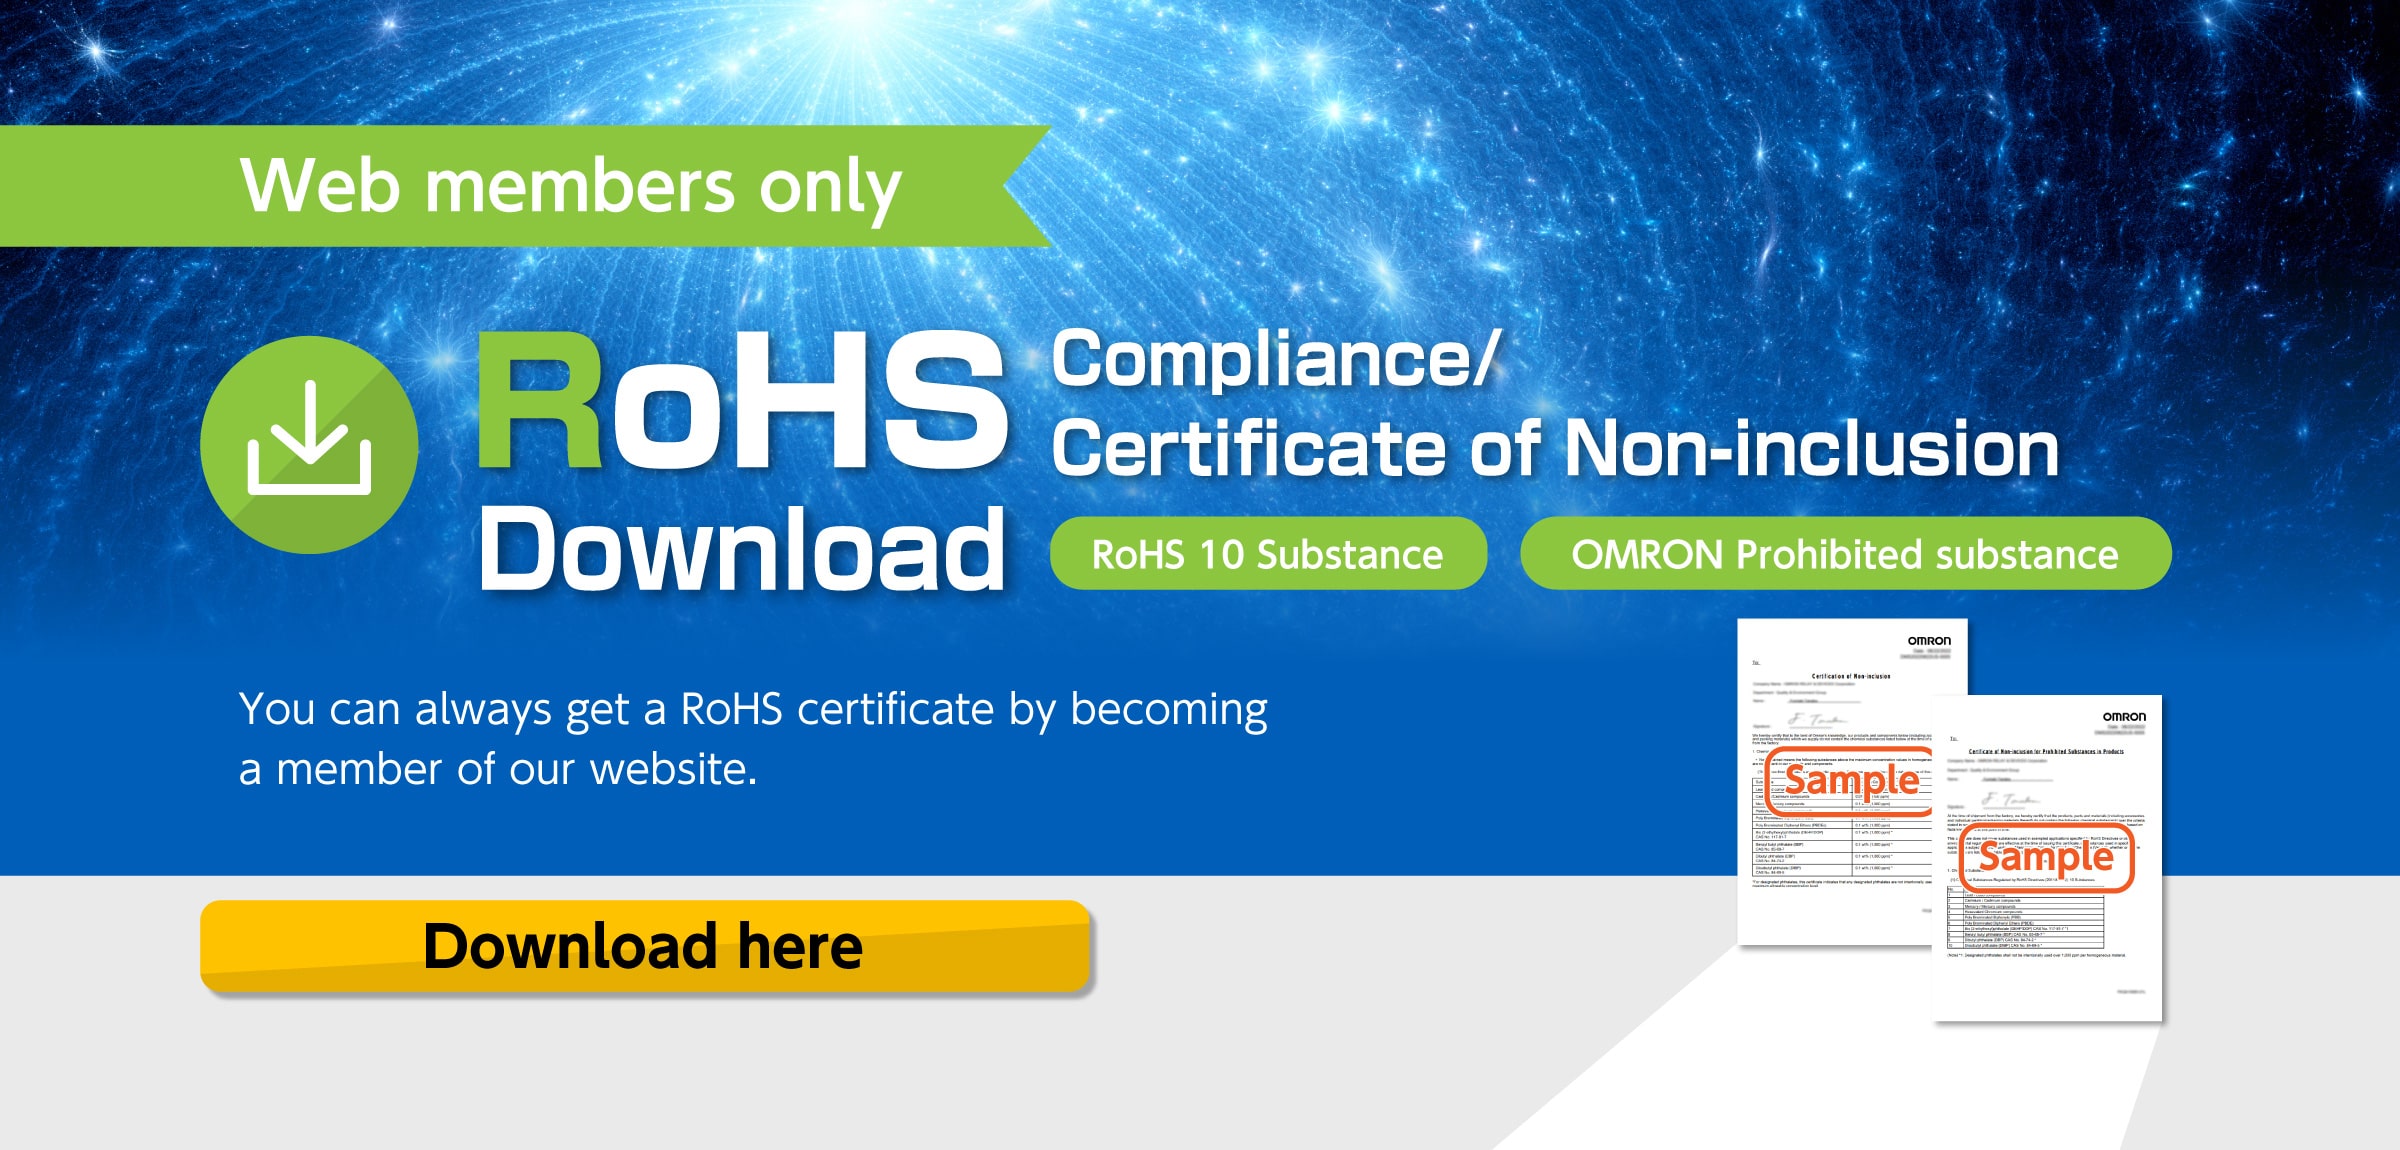 RoHS Compliance/ Certificate of Non-inclusion Download